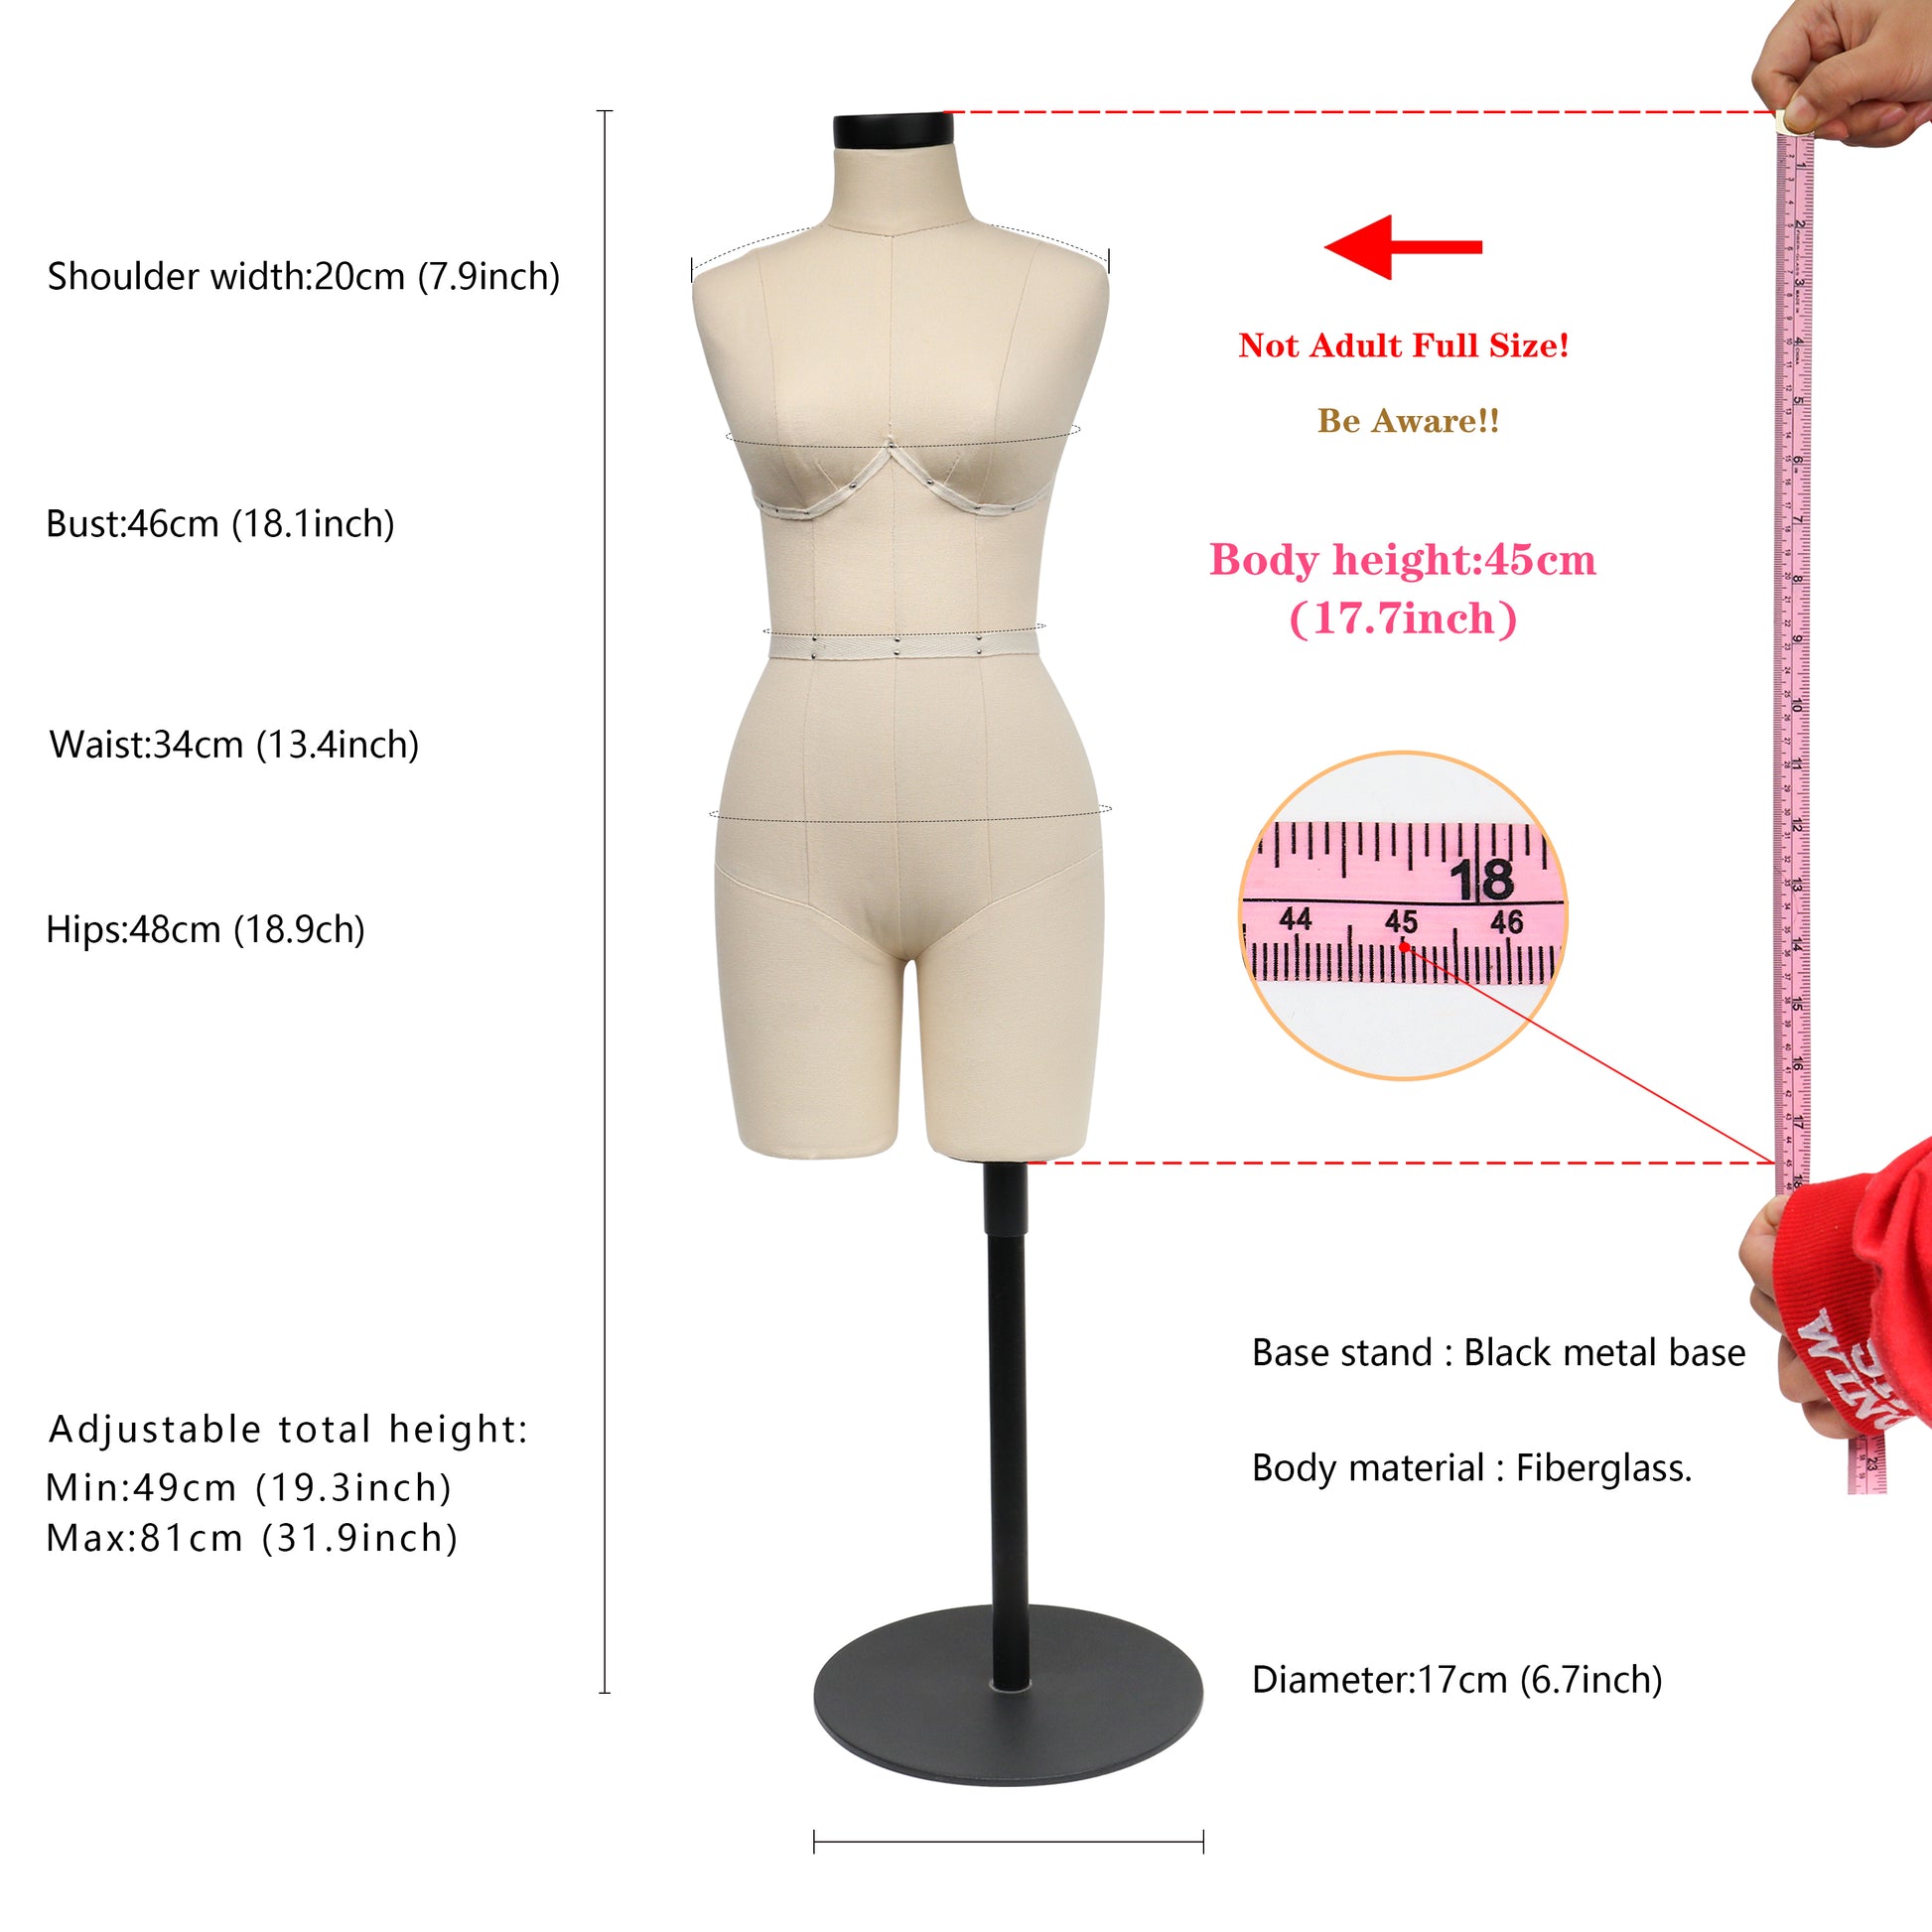 Jelimate 34B Size Female Half Scale Dress Form For Sewing,Mini